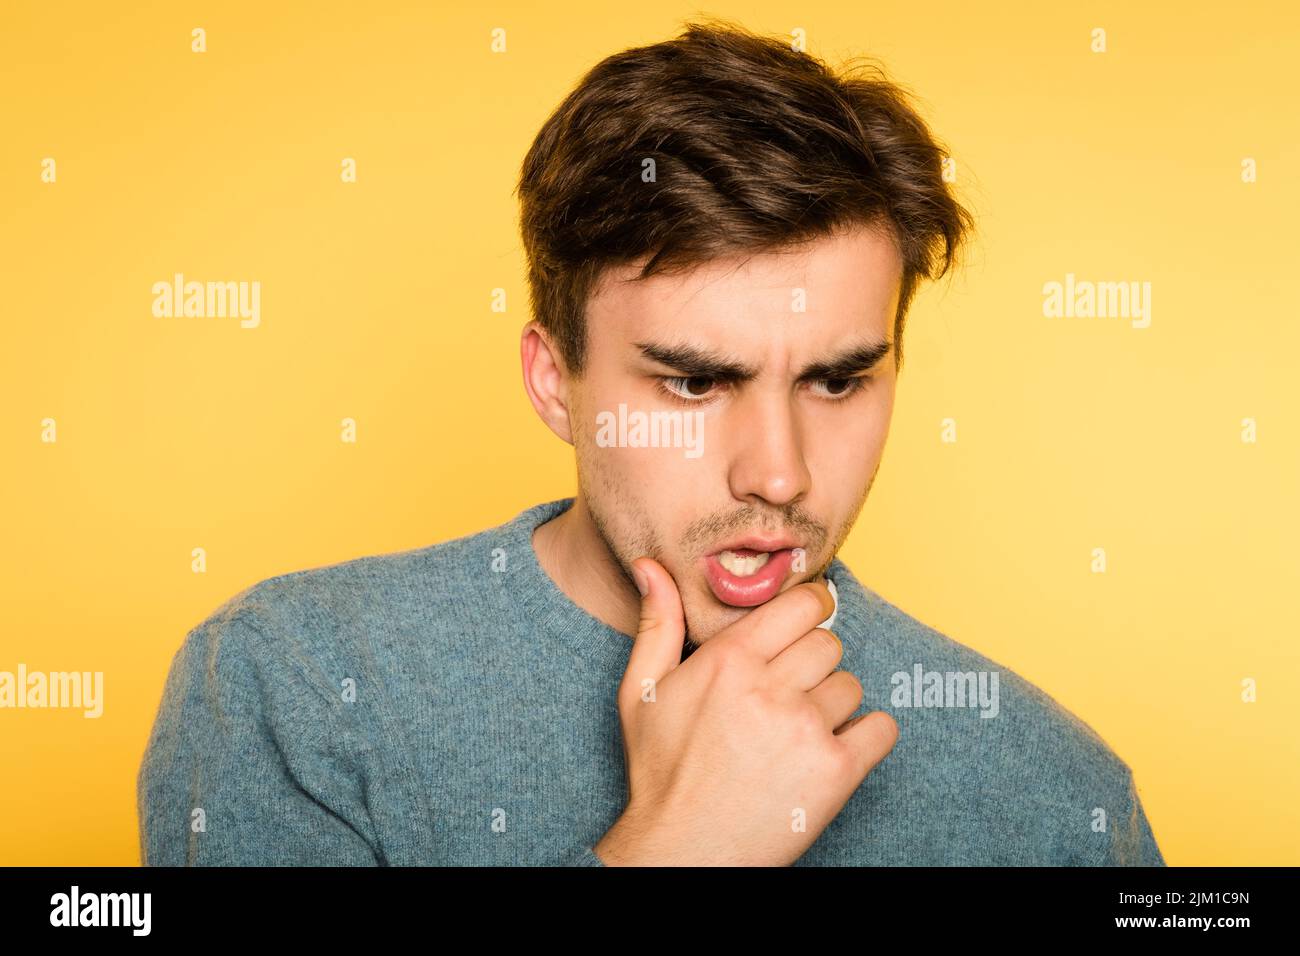 worried distracted pensive man scratch chin think Stock Photo